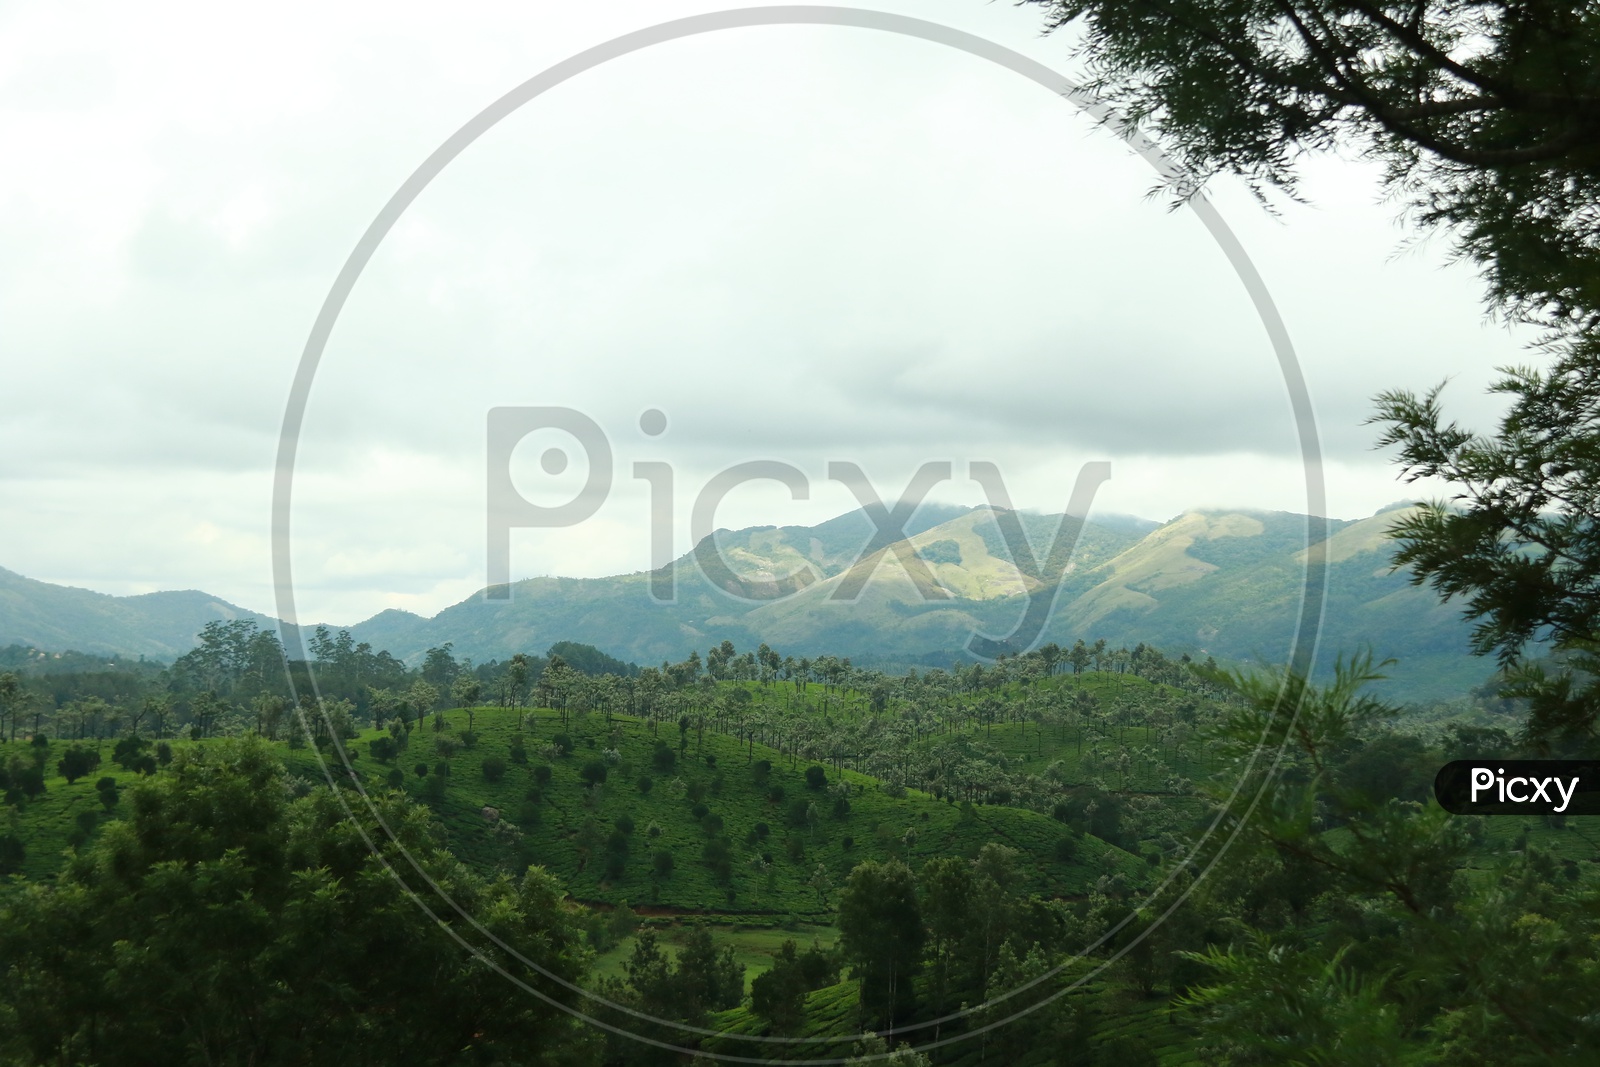 Landscape Of  Green Mountains Valleys With Trees And Fog Clouds in Munnar Ghat Roads